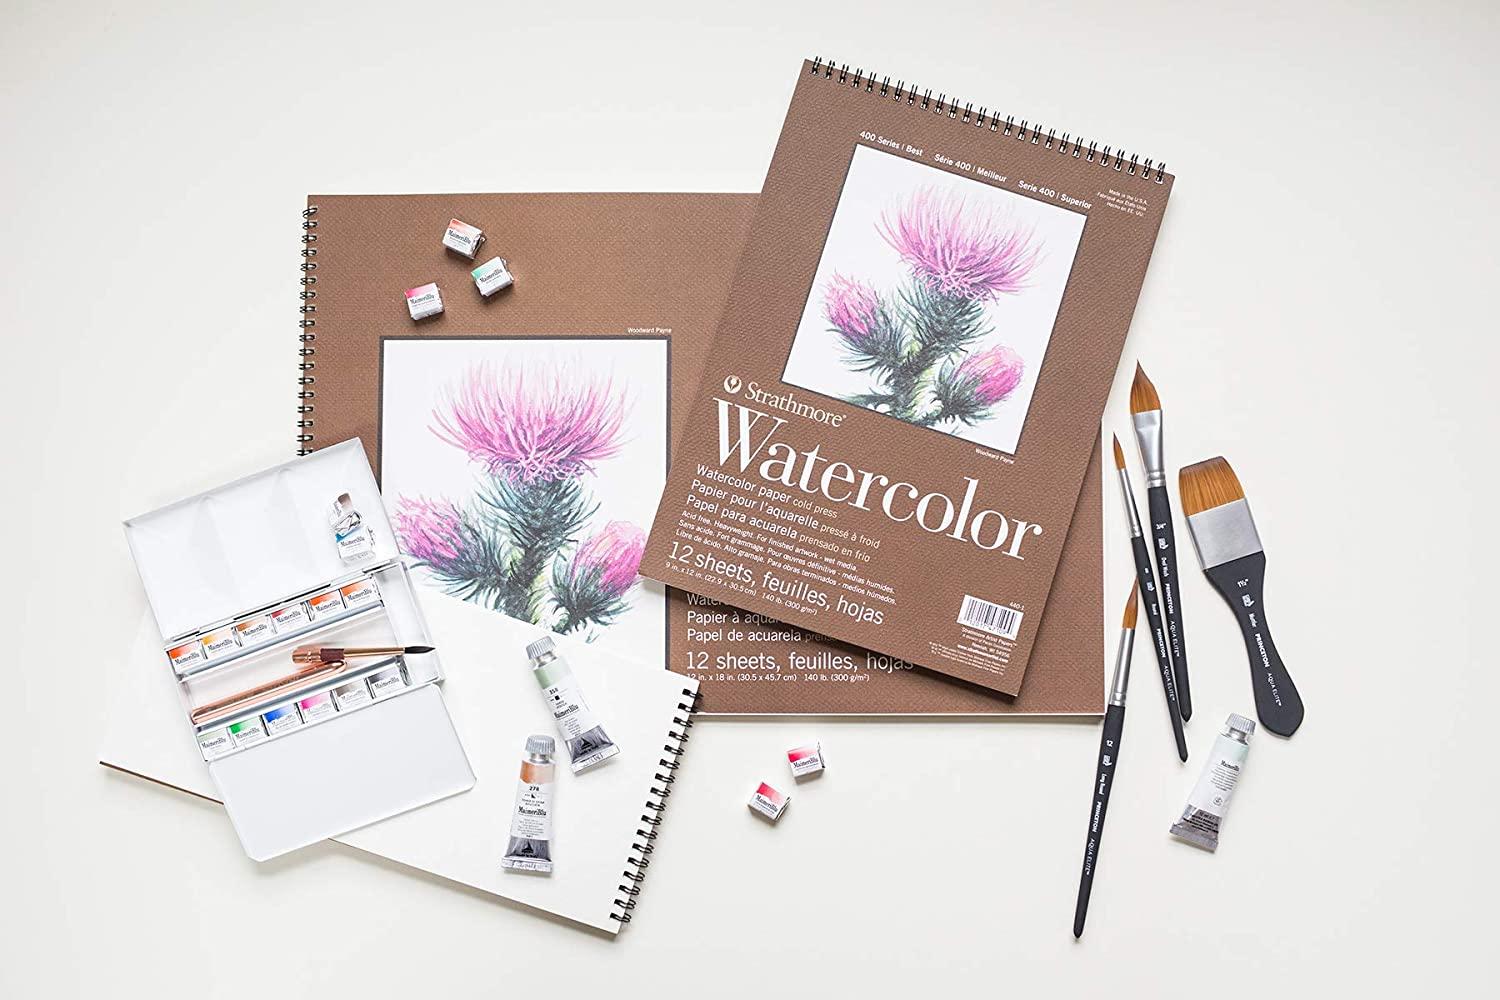 Strathmore Visual Journal 140 lb. Cold Press Watercolor Paper 9 x